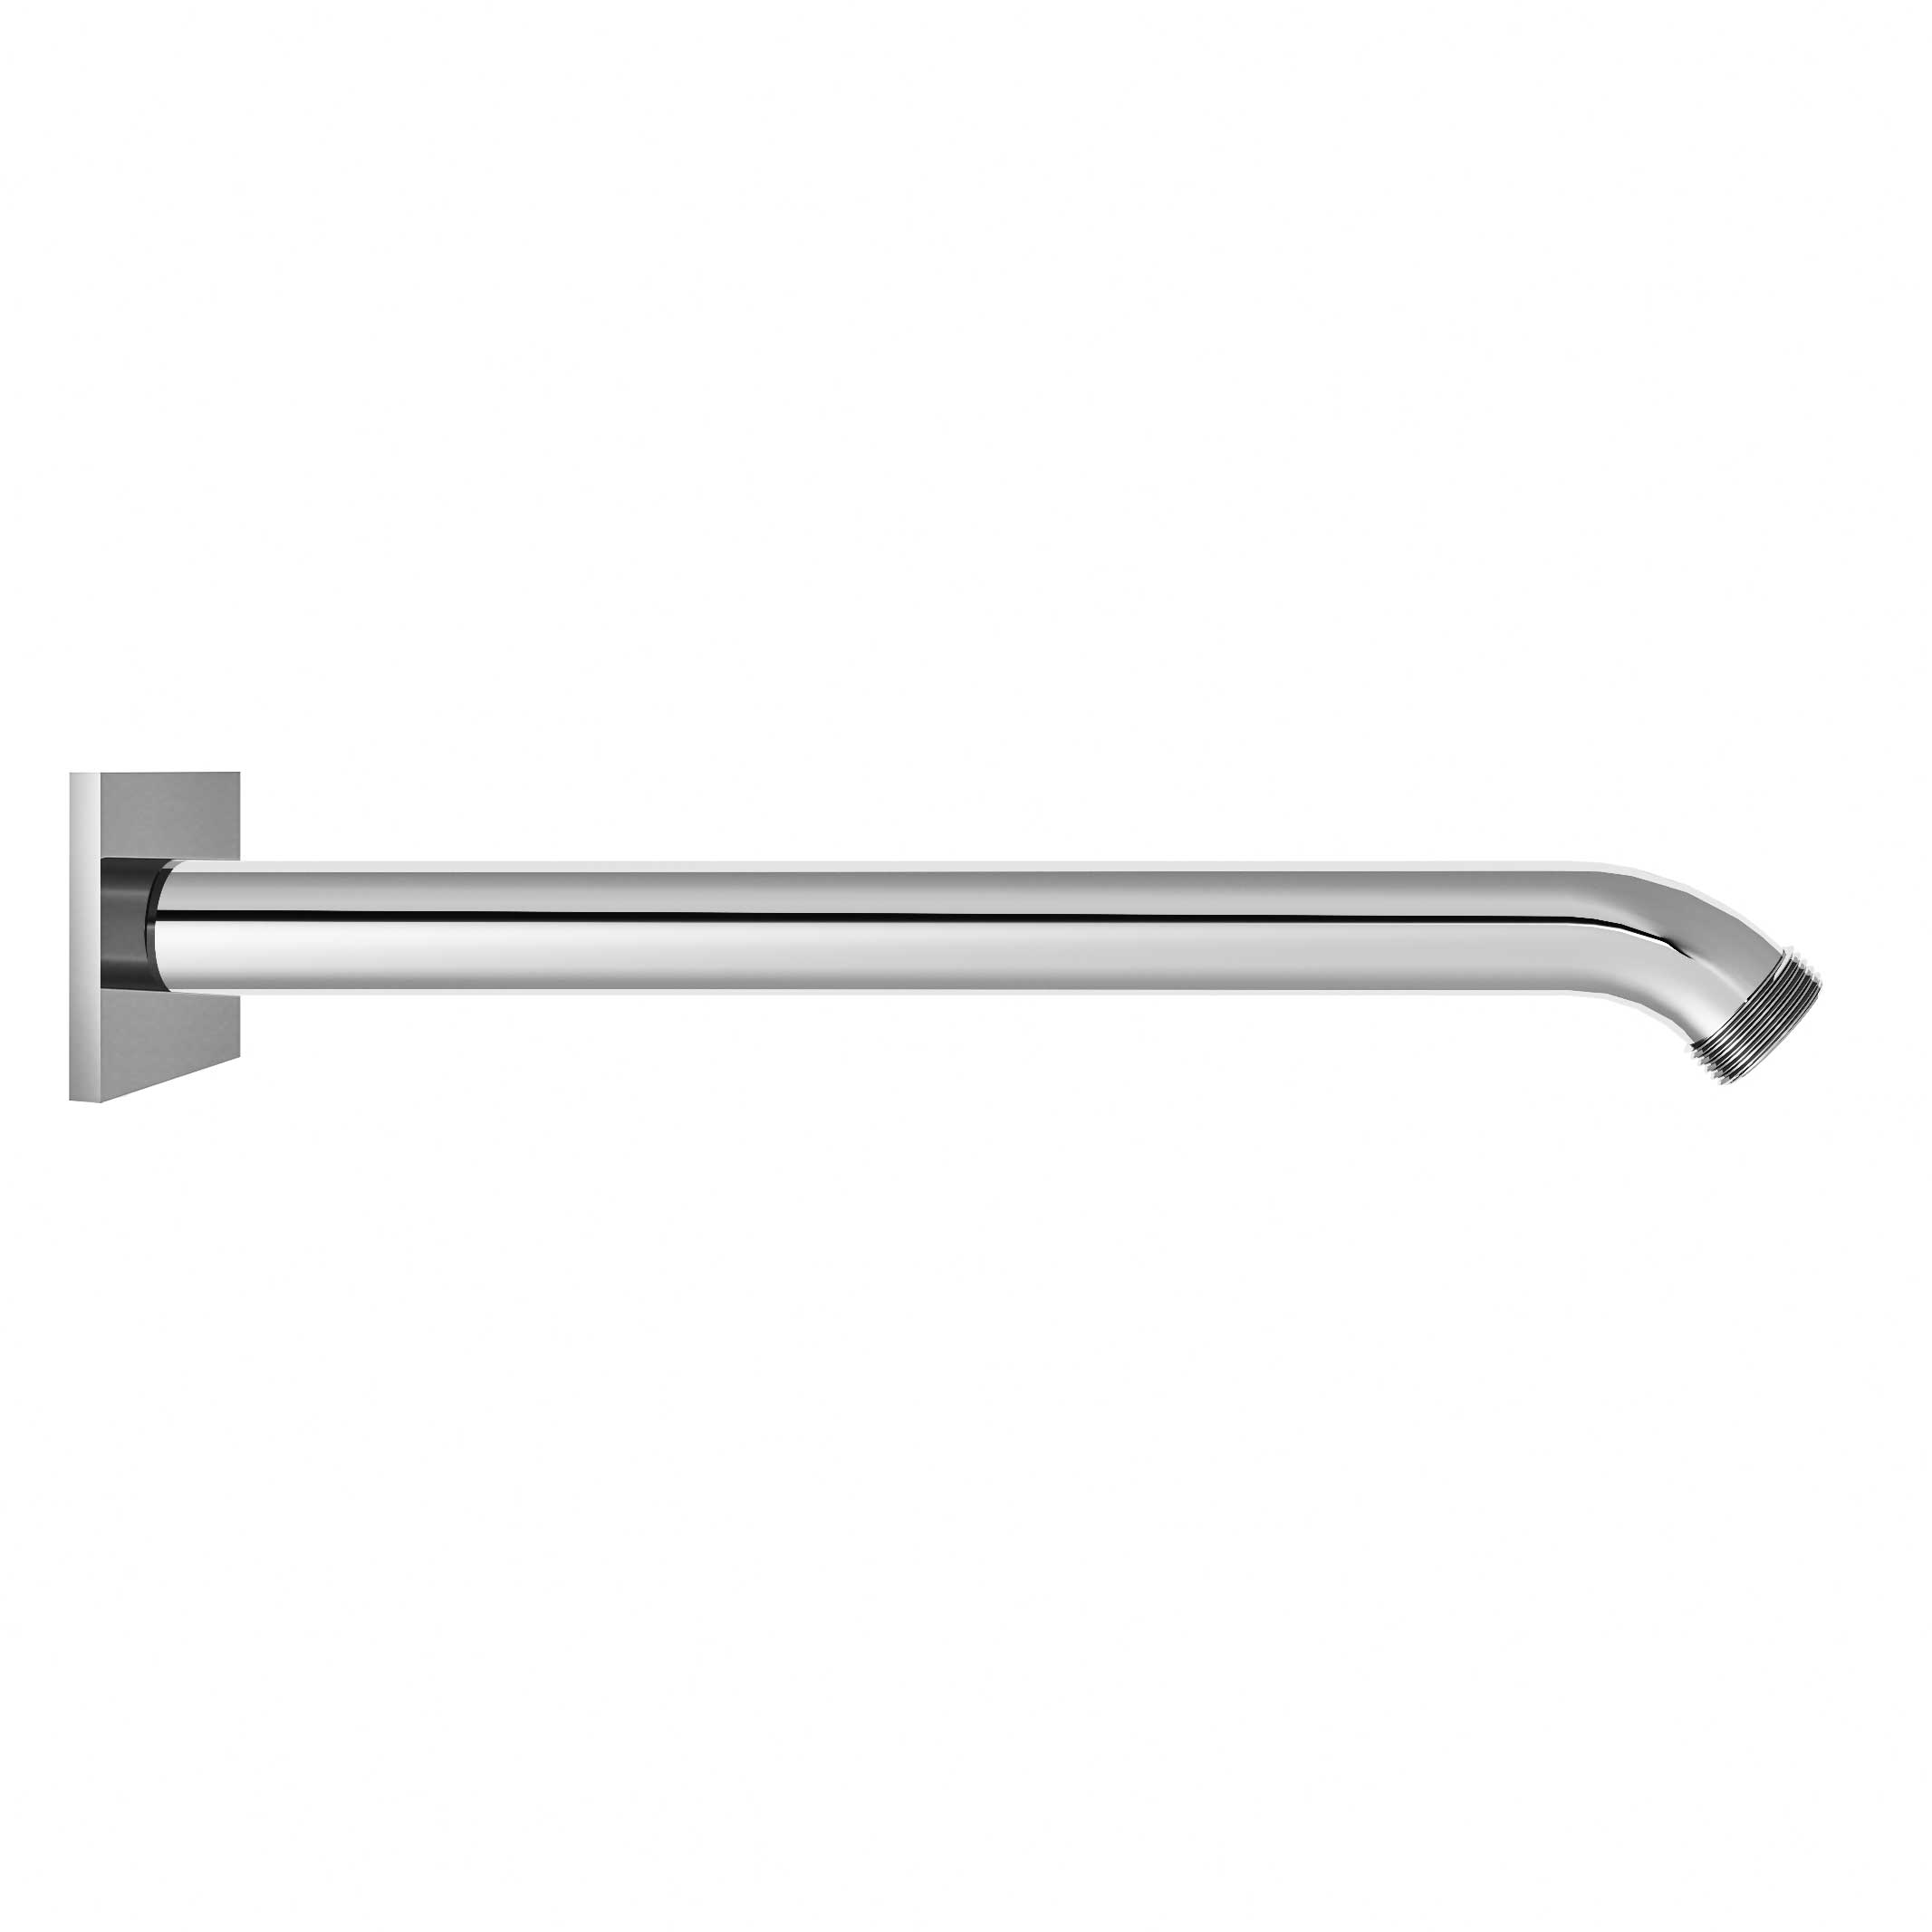 S05-2W170 Wall mounted shower arm 170mm